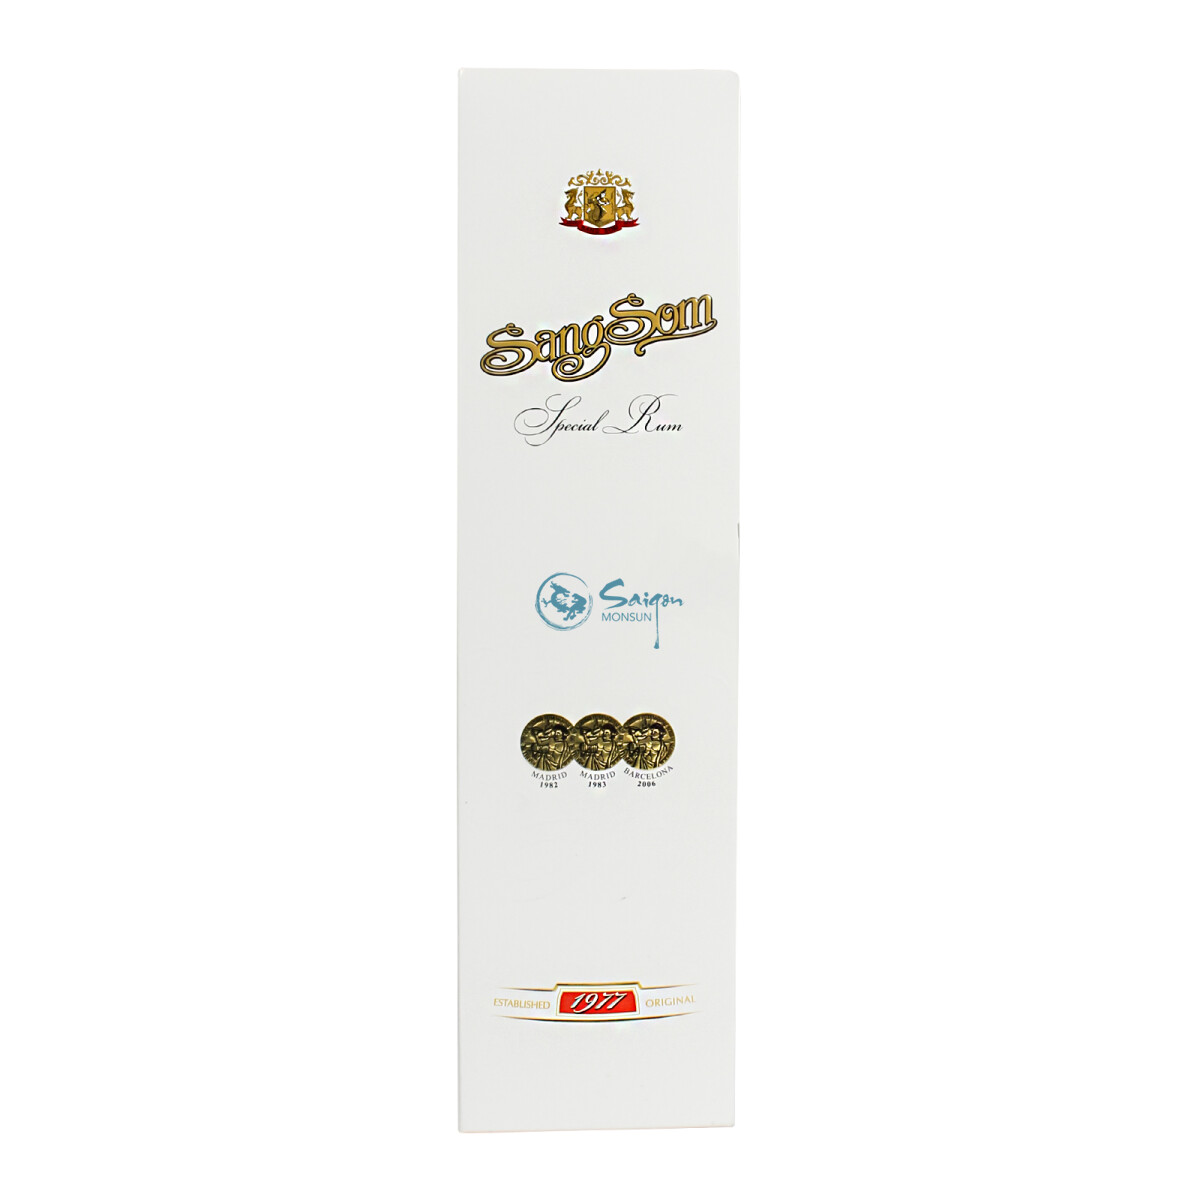 Sang Som Special Rum 700ml